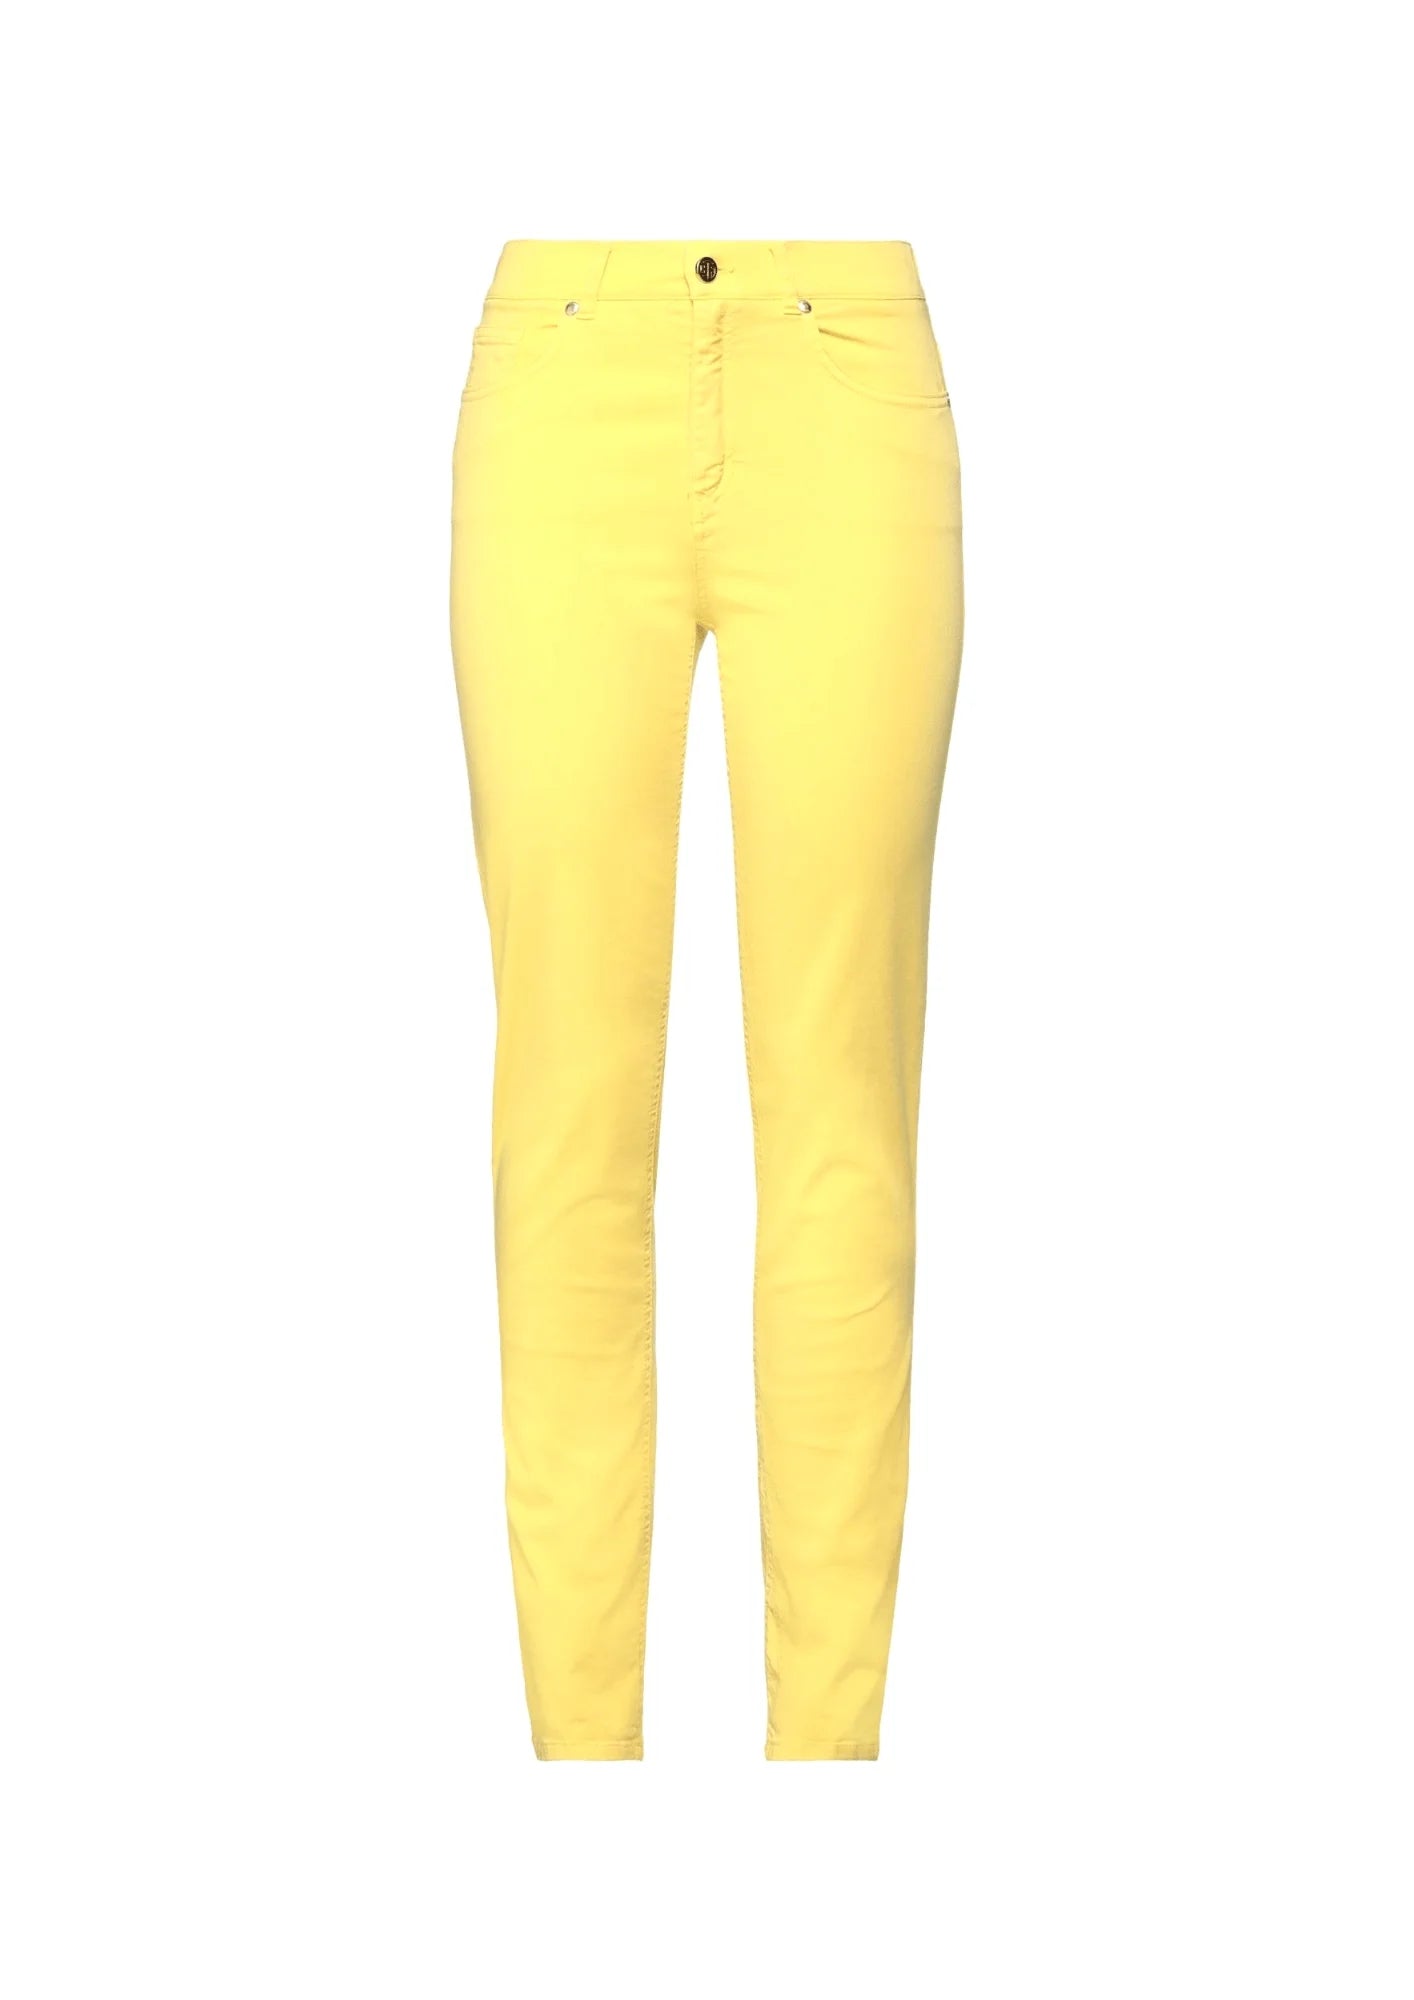 YELLOW 5 POCKETS SLIM-FIT JEANS